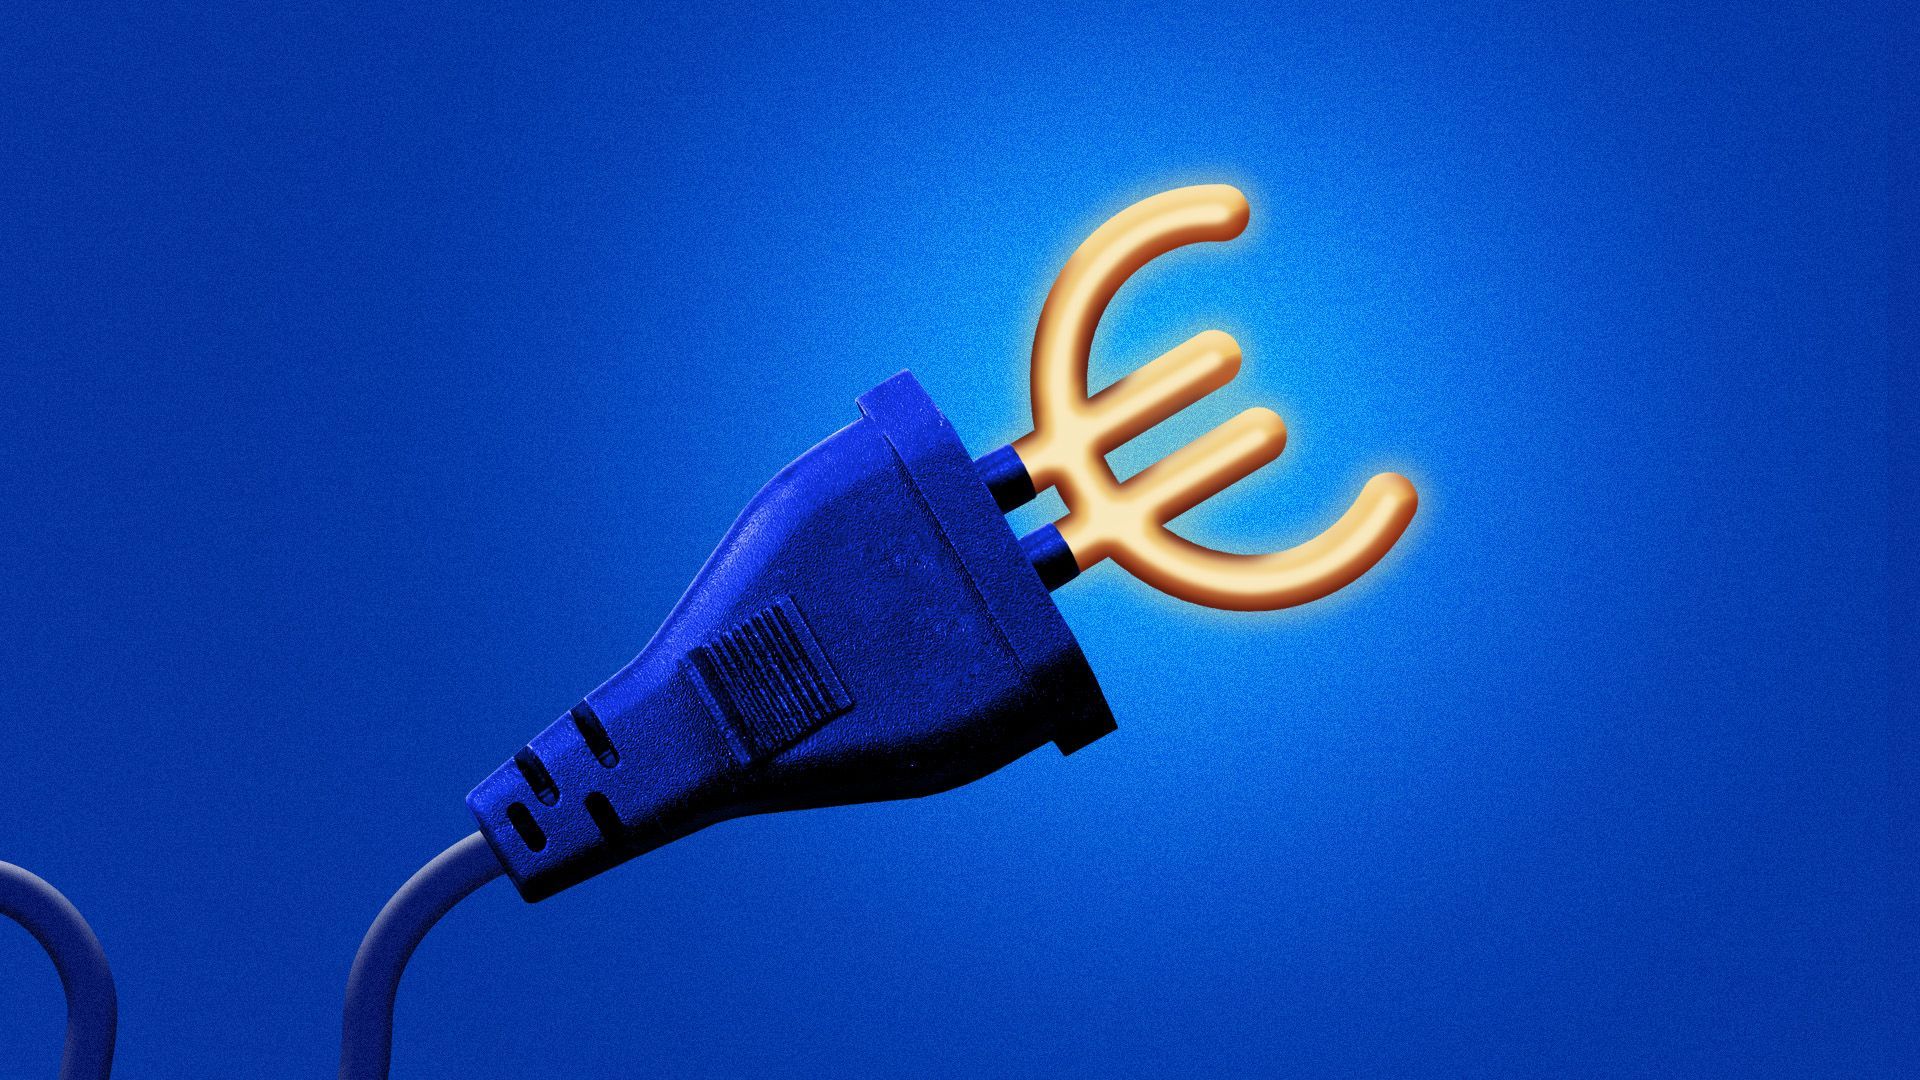 Illustration of an electrical cord with the prongs in the shape of the euro symbol